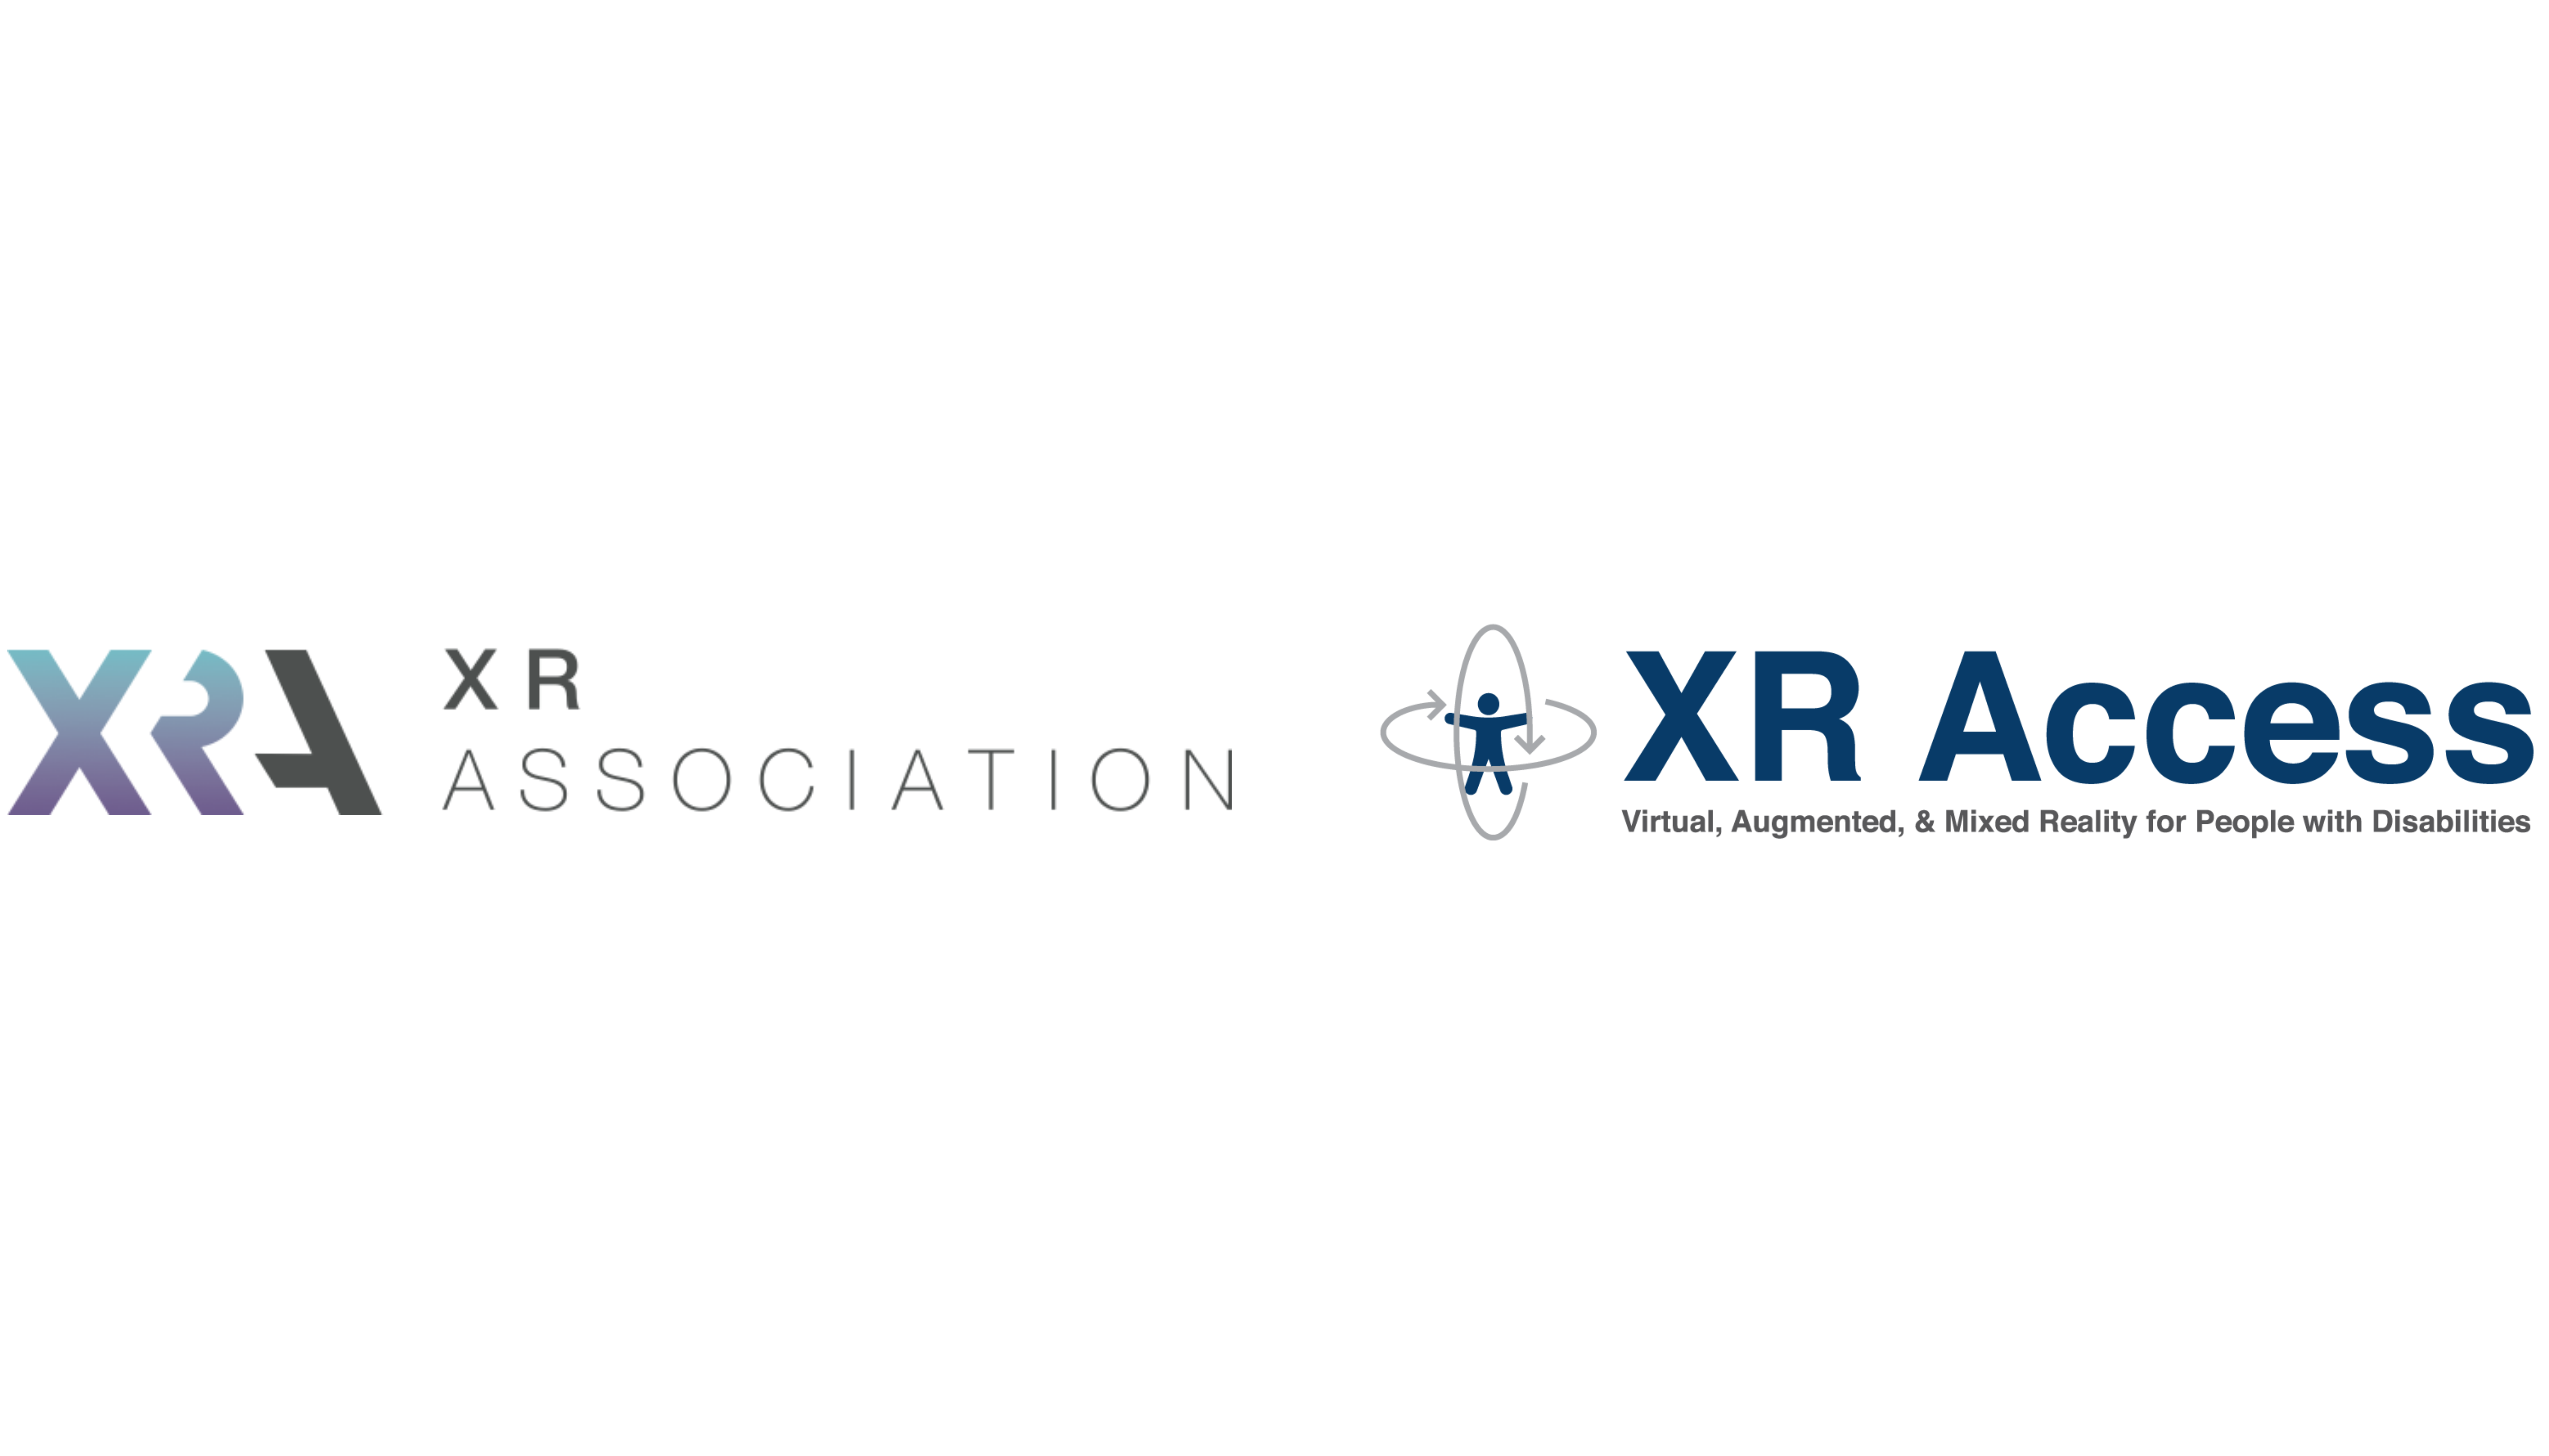 XR ASSOCIATION LAUNCHES A NEW ACCESSIBILITY FOCUSED SITE, XRACCESSABILITY.GITHUB.IO, IN COLLABORATION WITH XR ACCESS